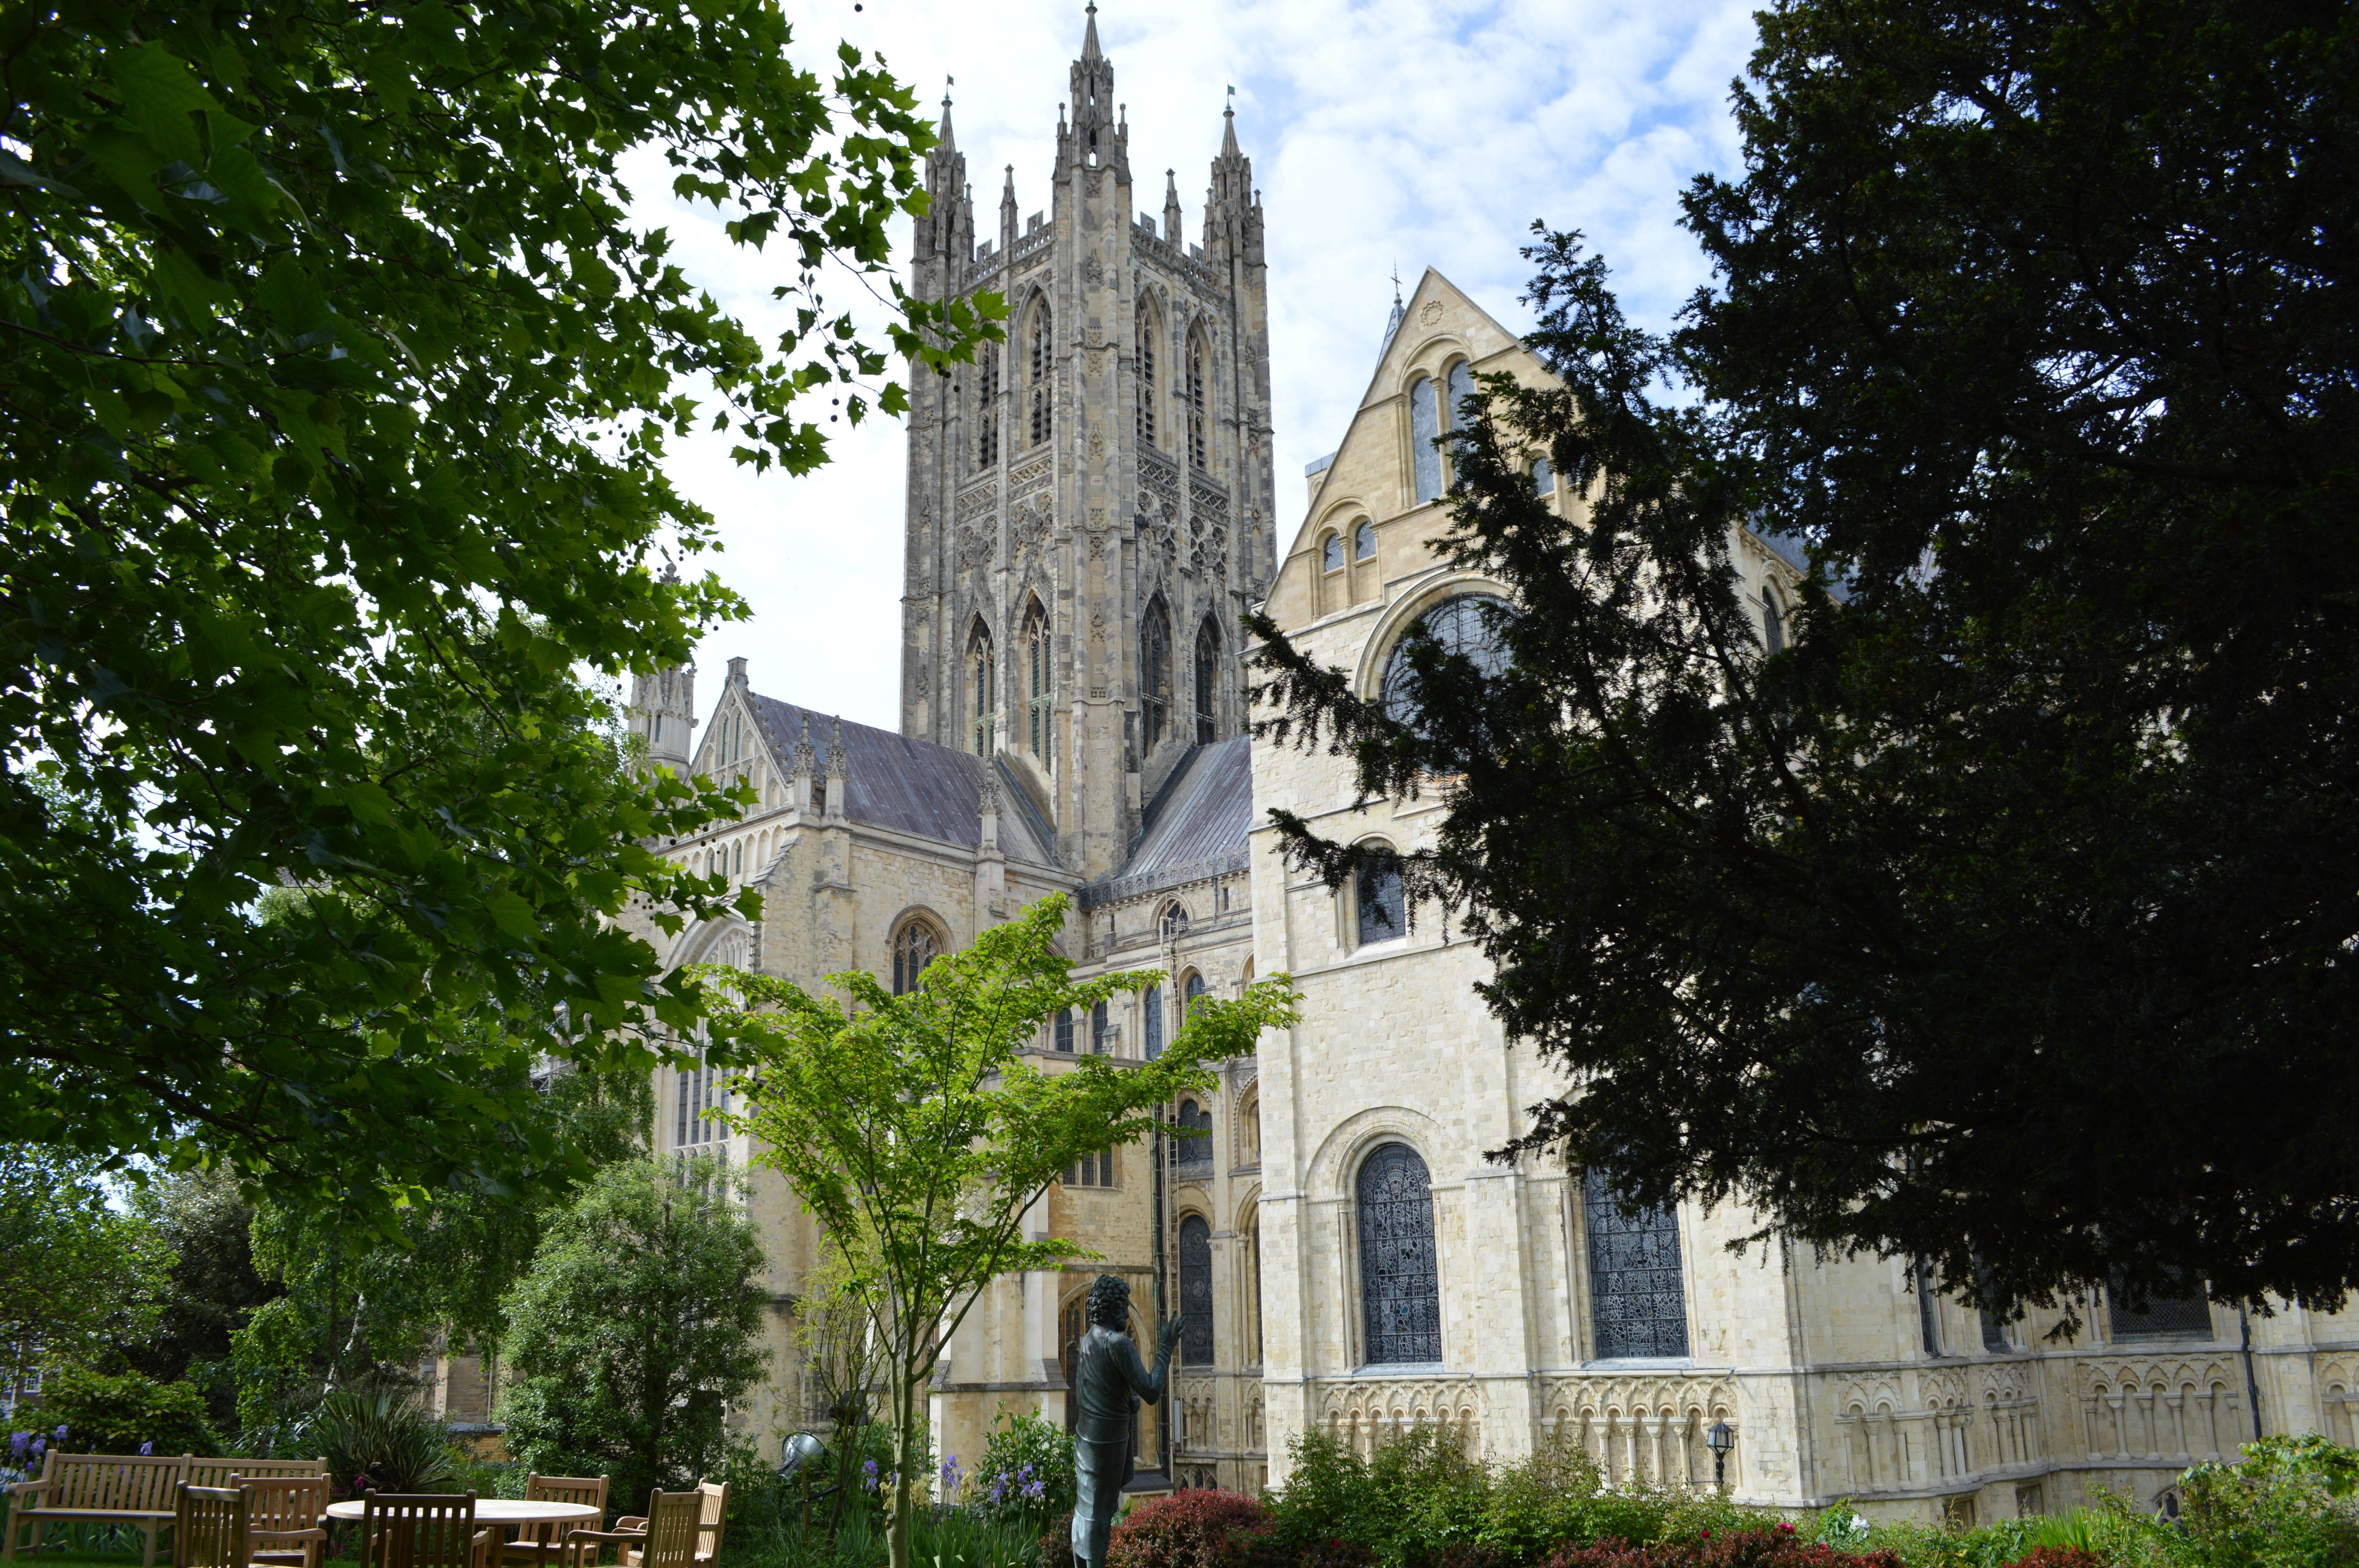 (c) Canterbury-cathedral.org